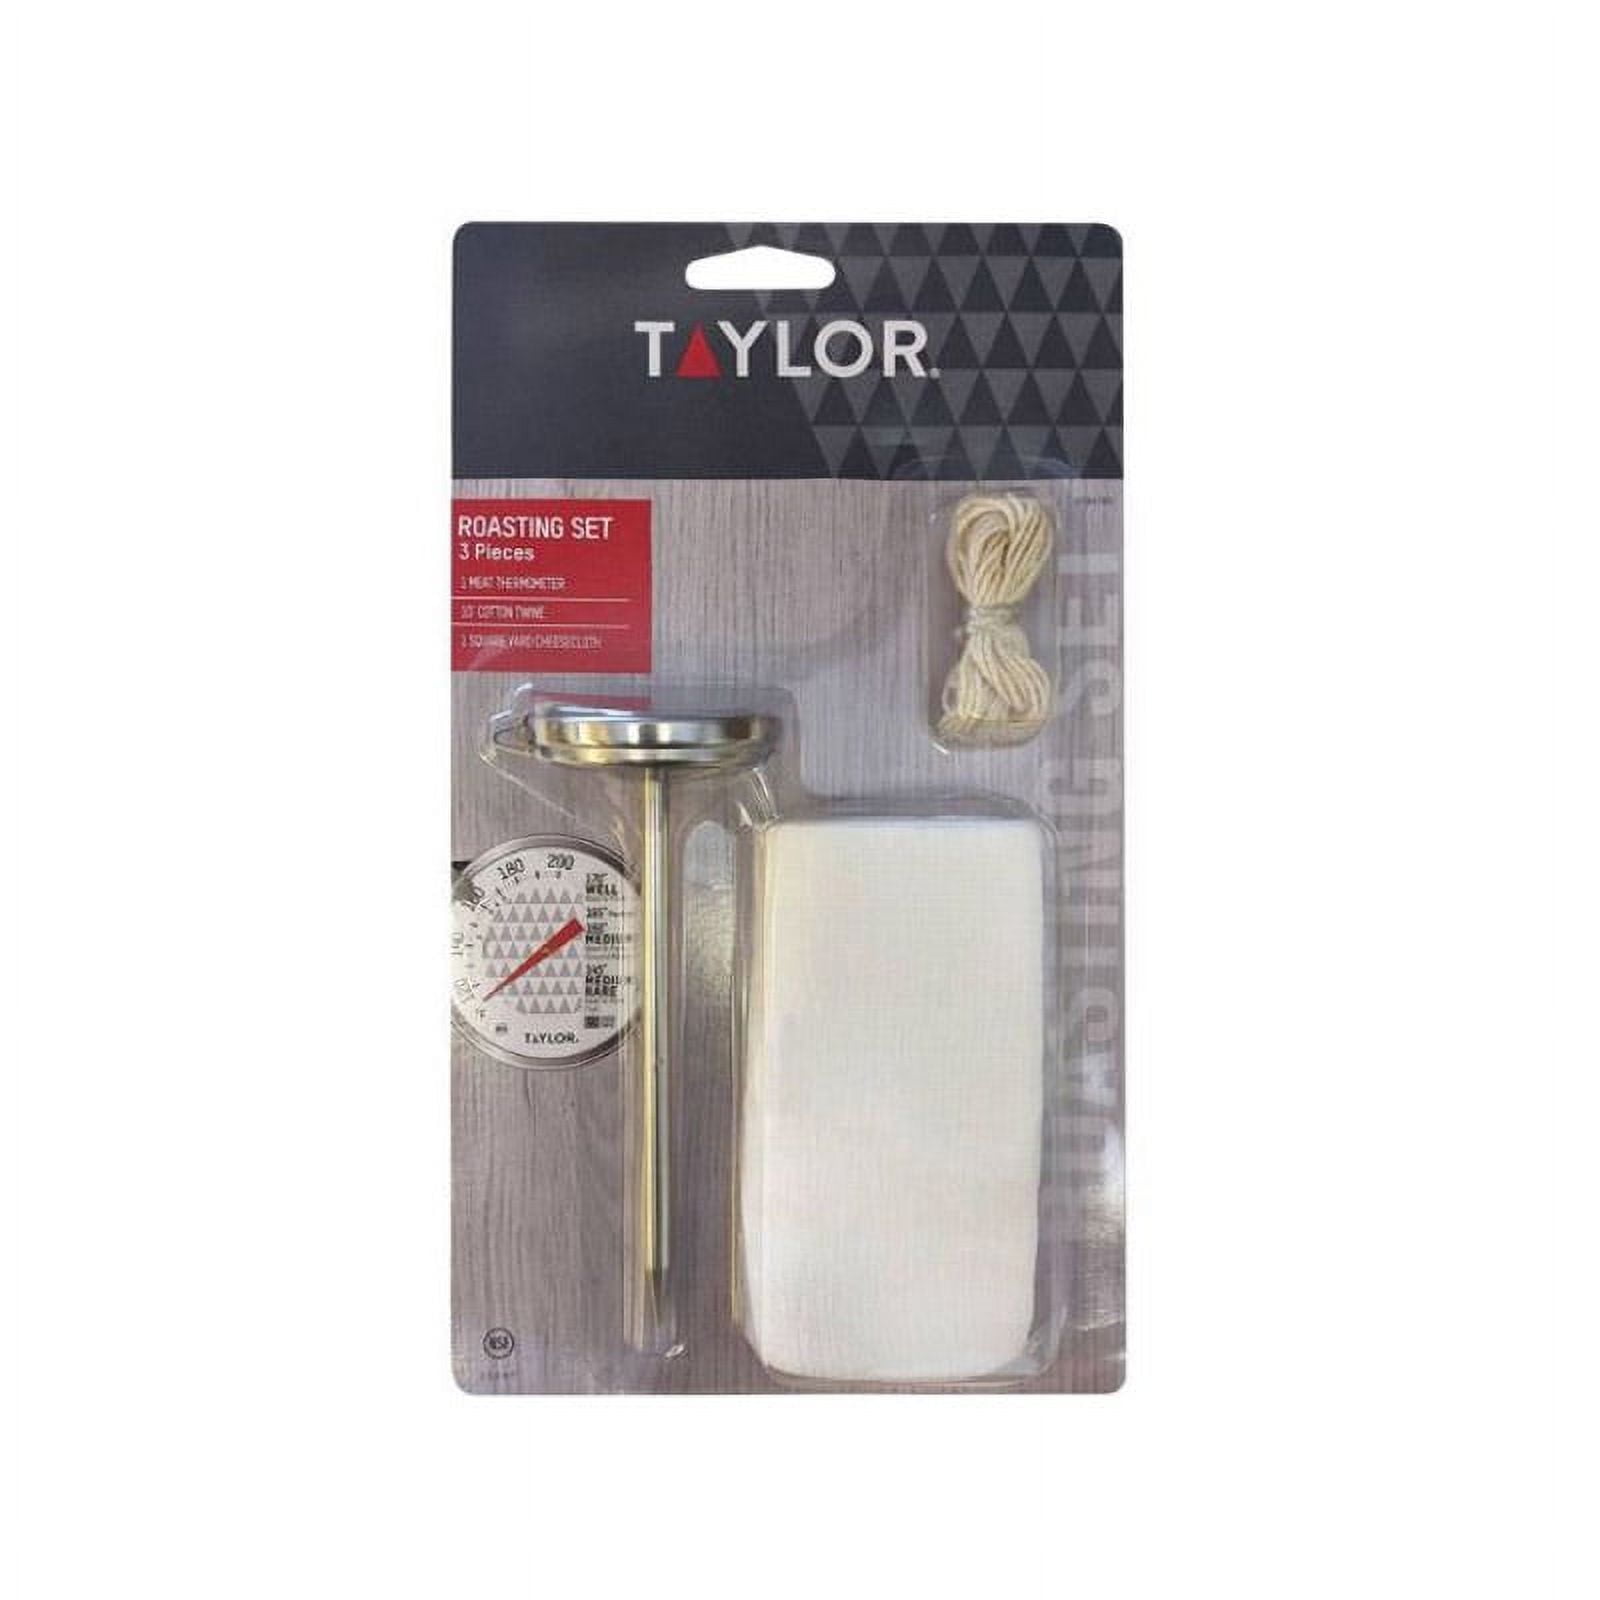 Taylor Roast/Yeast Kitchen Thermometer - Gillman Home Center